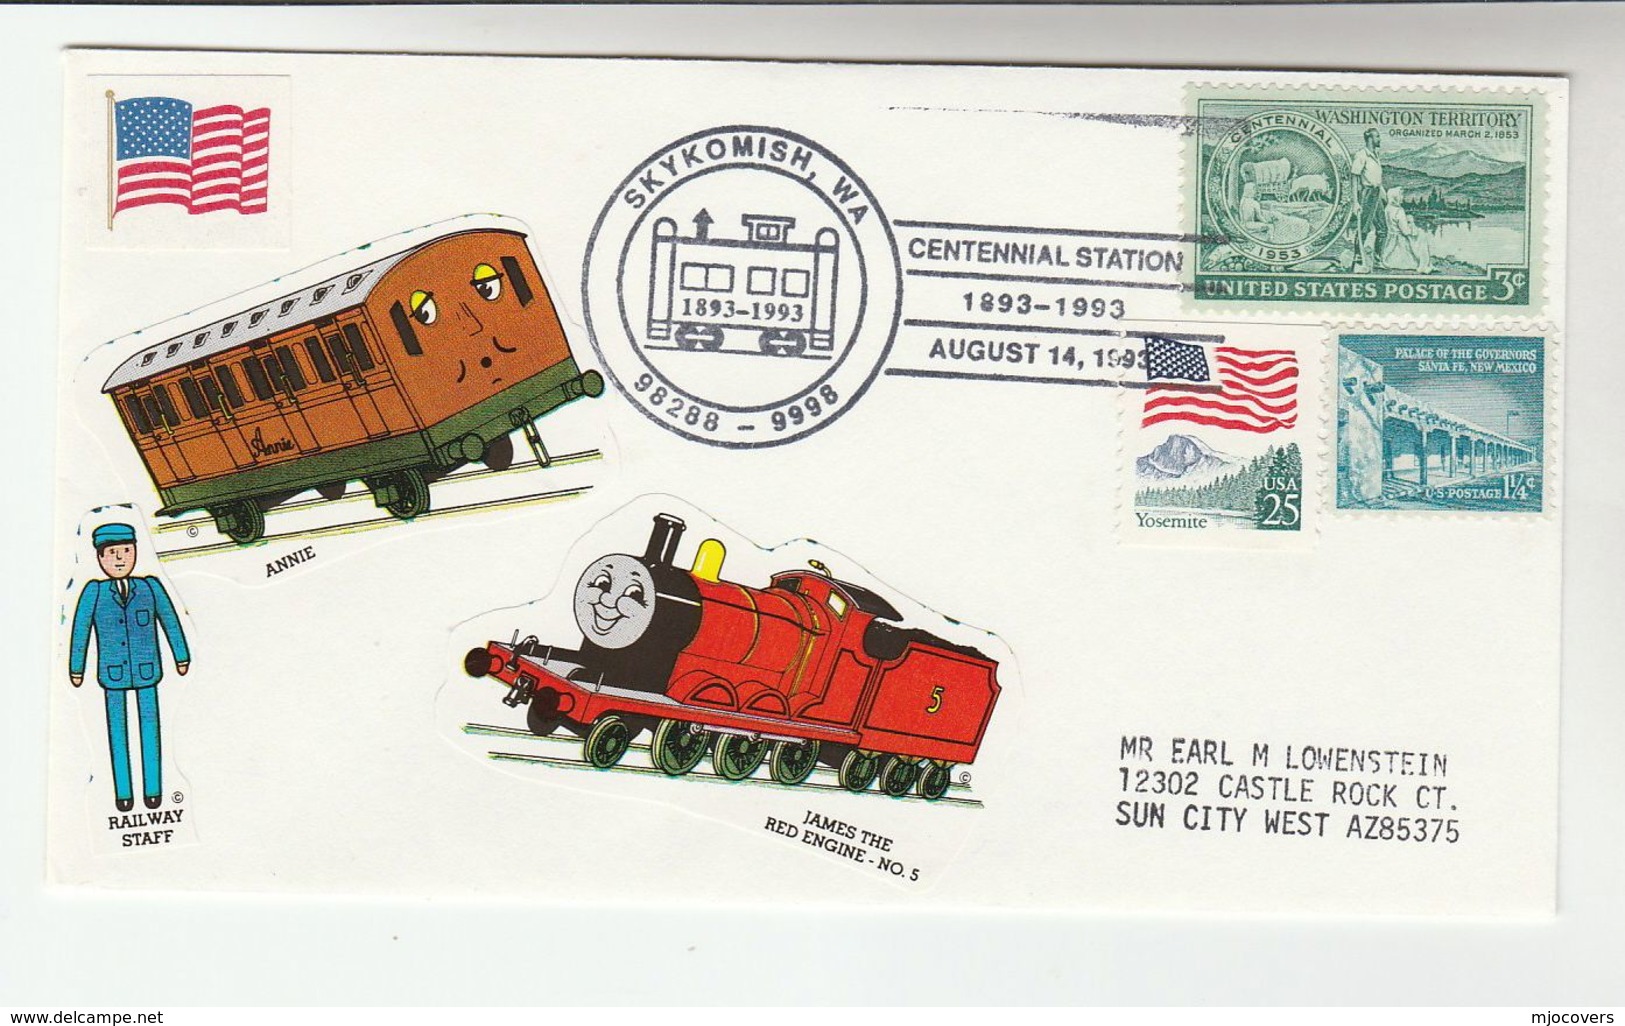 1993  SKYKOMISH CENTENNIAL Steam EVENT COVER  Stamps USA With 'JAMES THE RED  ENGINE'  Label Train Railway - Trains